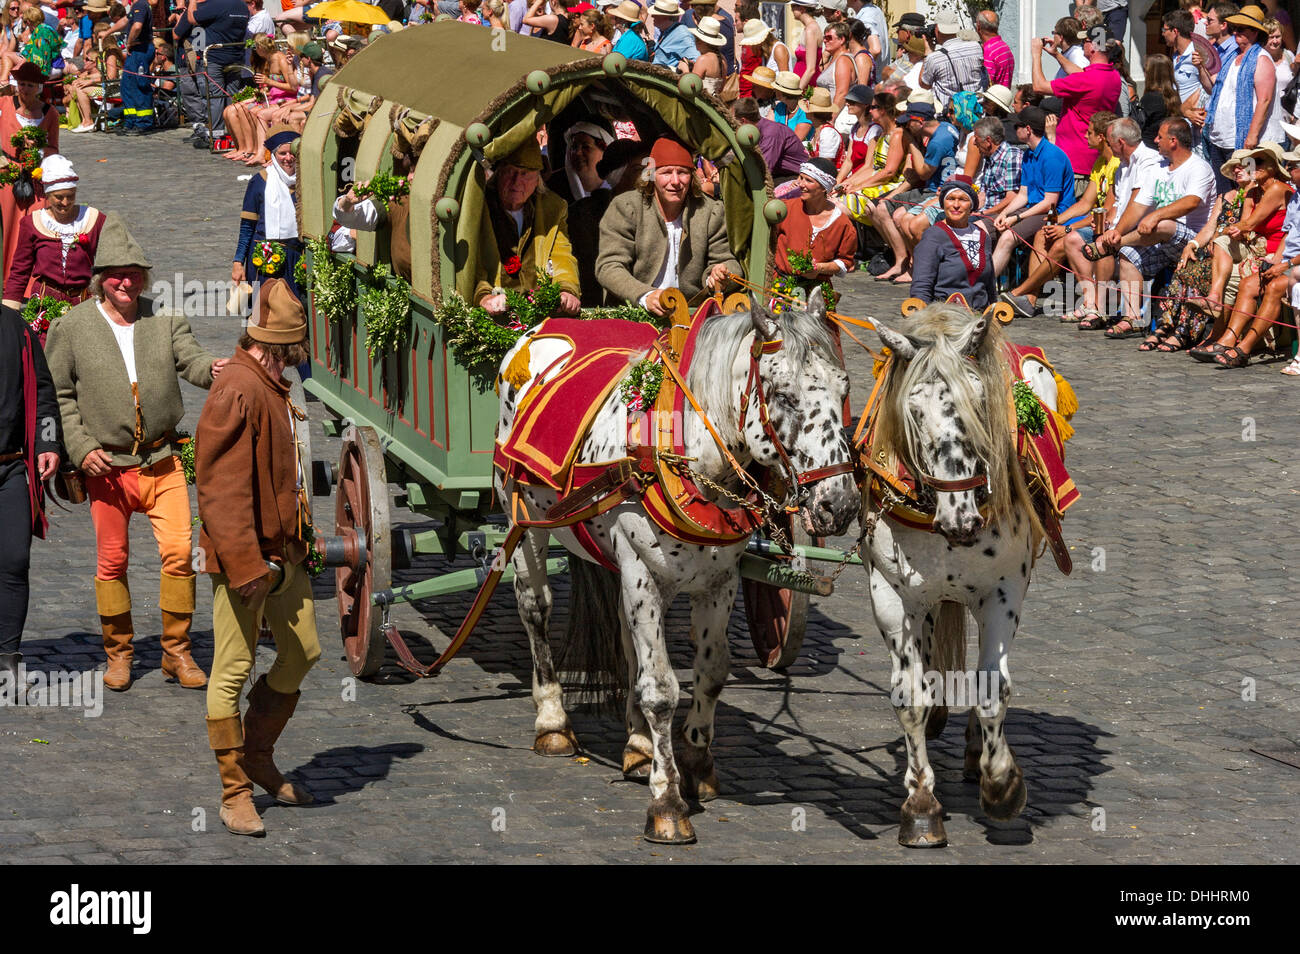 Horse-drawn covered wagon, medieval wedding procession wearing traditional costume to celebrate 'Landshut Wedding 1475' Stock Photo